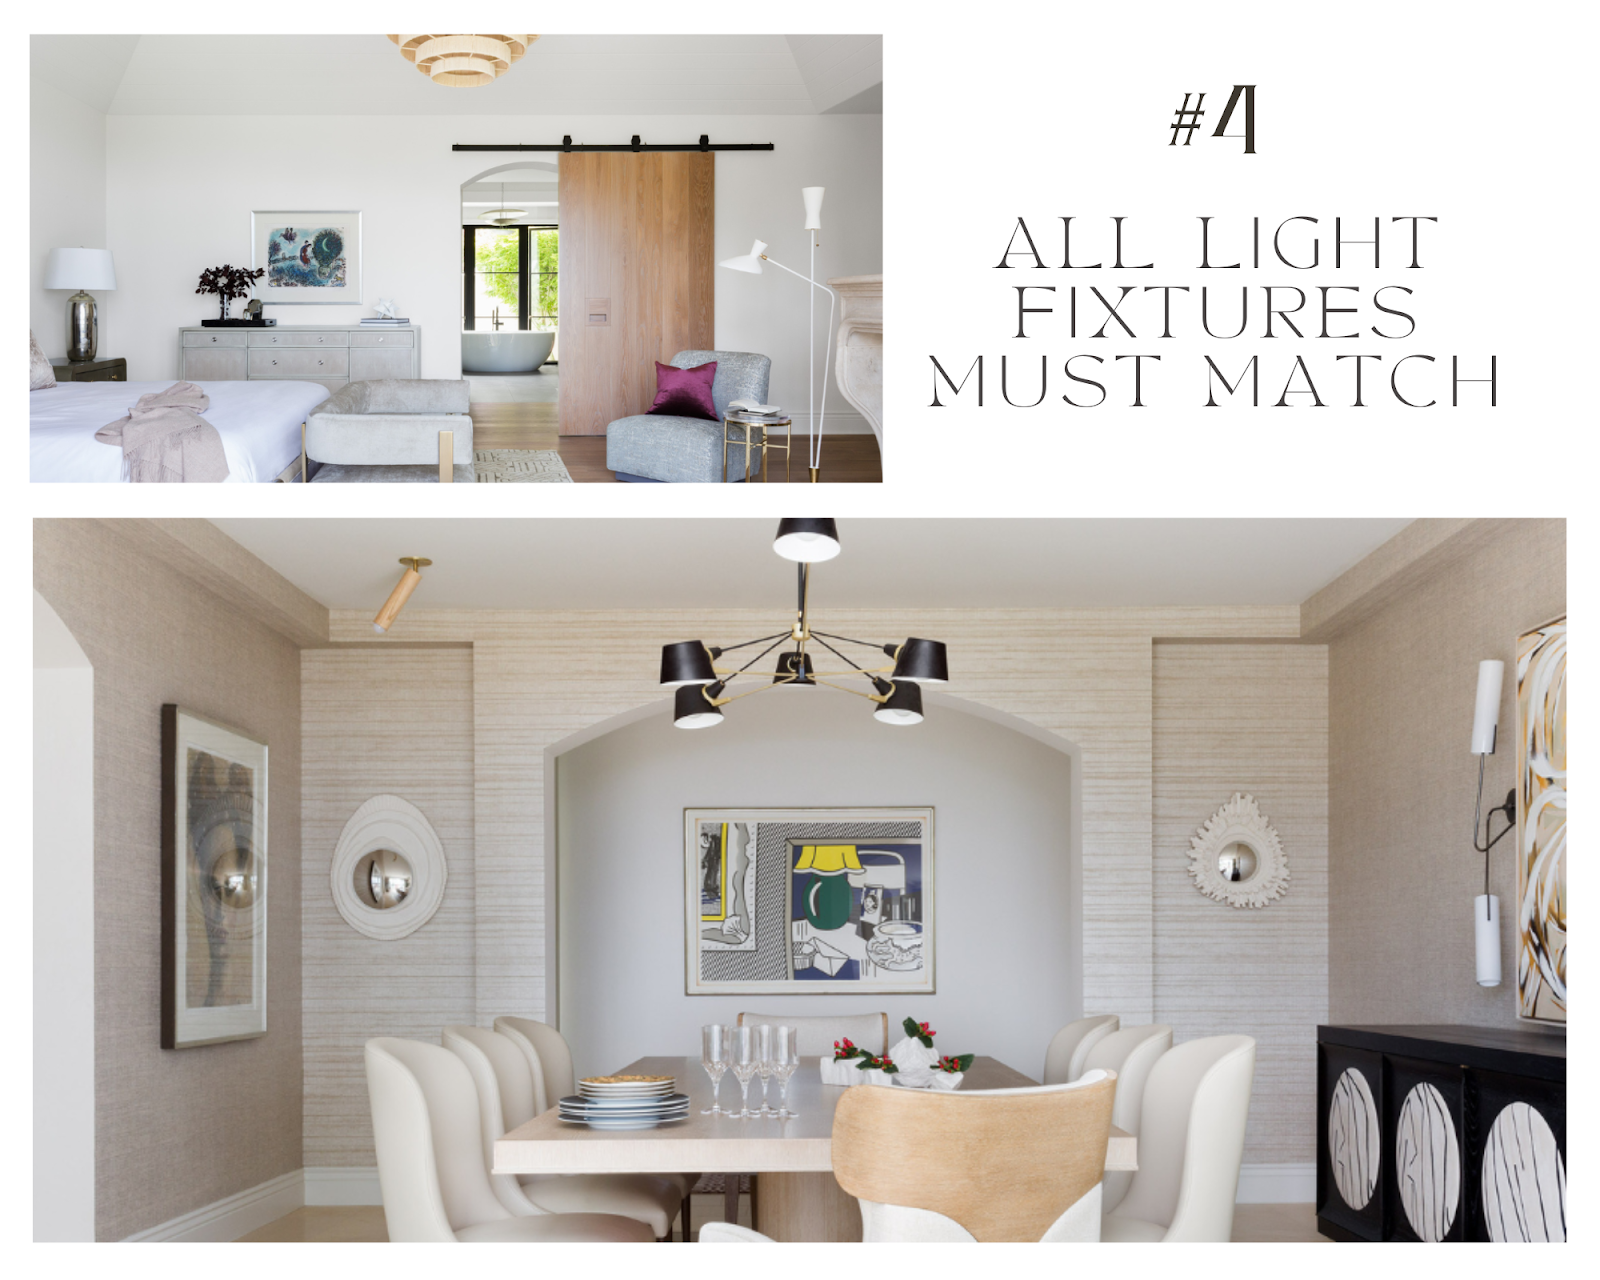 Another Myth: All light fixtures must match each other